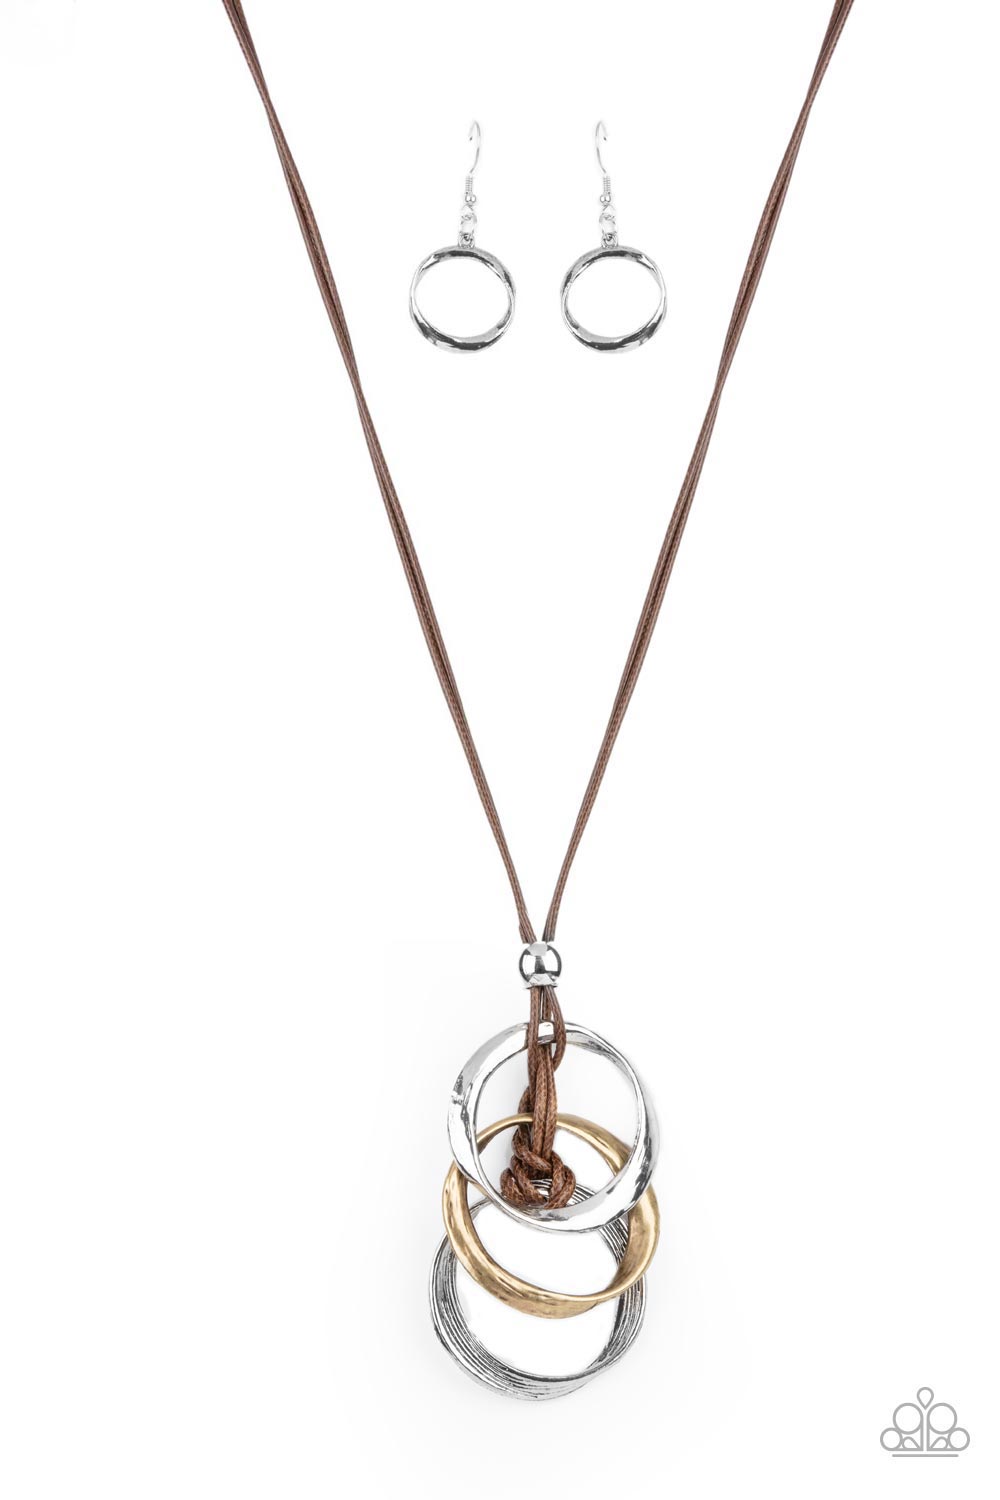 ​Harmonious Hardware - Brown - Brass - Silver Necklace - Paparazzi Accessories - 
Infused with a silver bead, curved brass and silver rings are knotted in place at the bottom of a shiny brown cord for an intense industrial display. Features an adjustable clasp closure.
Sold as one individual necklace. Includes one pair of matching earrings.
